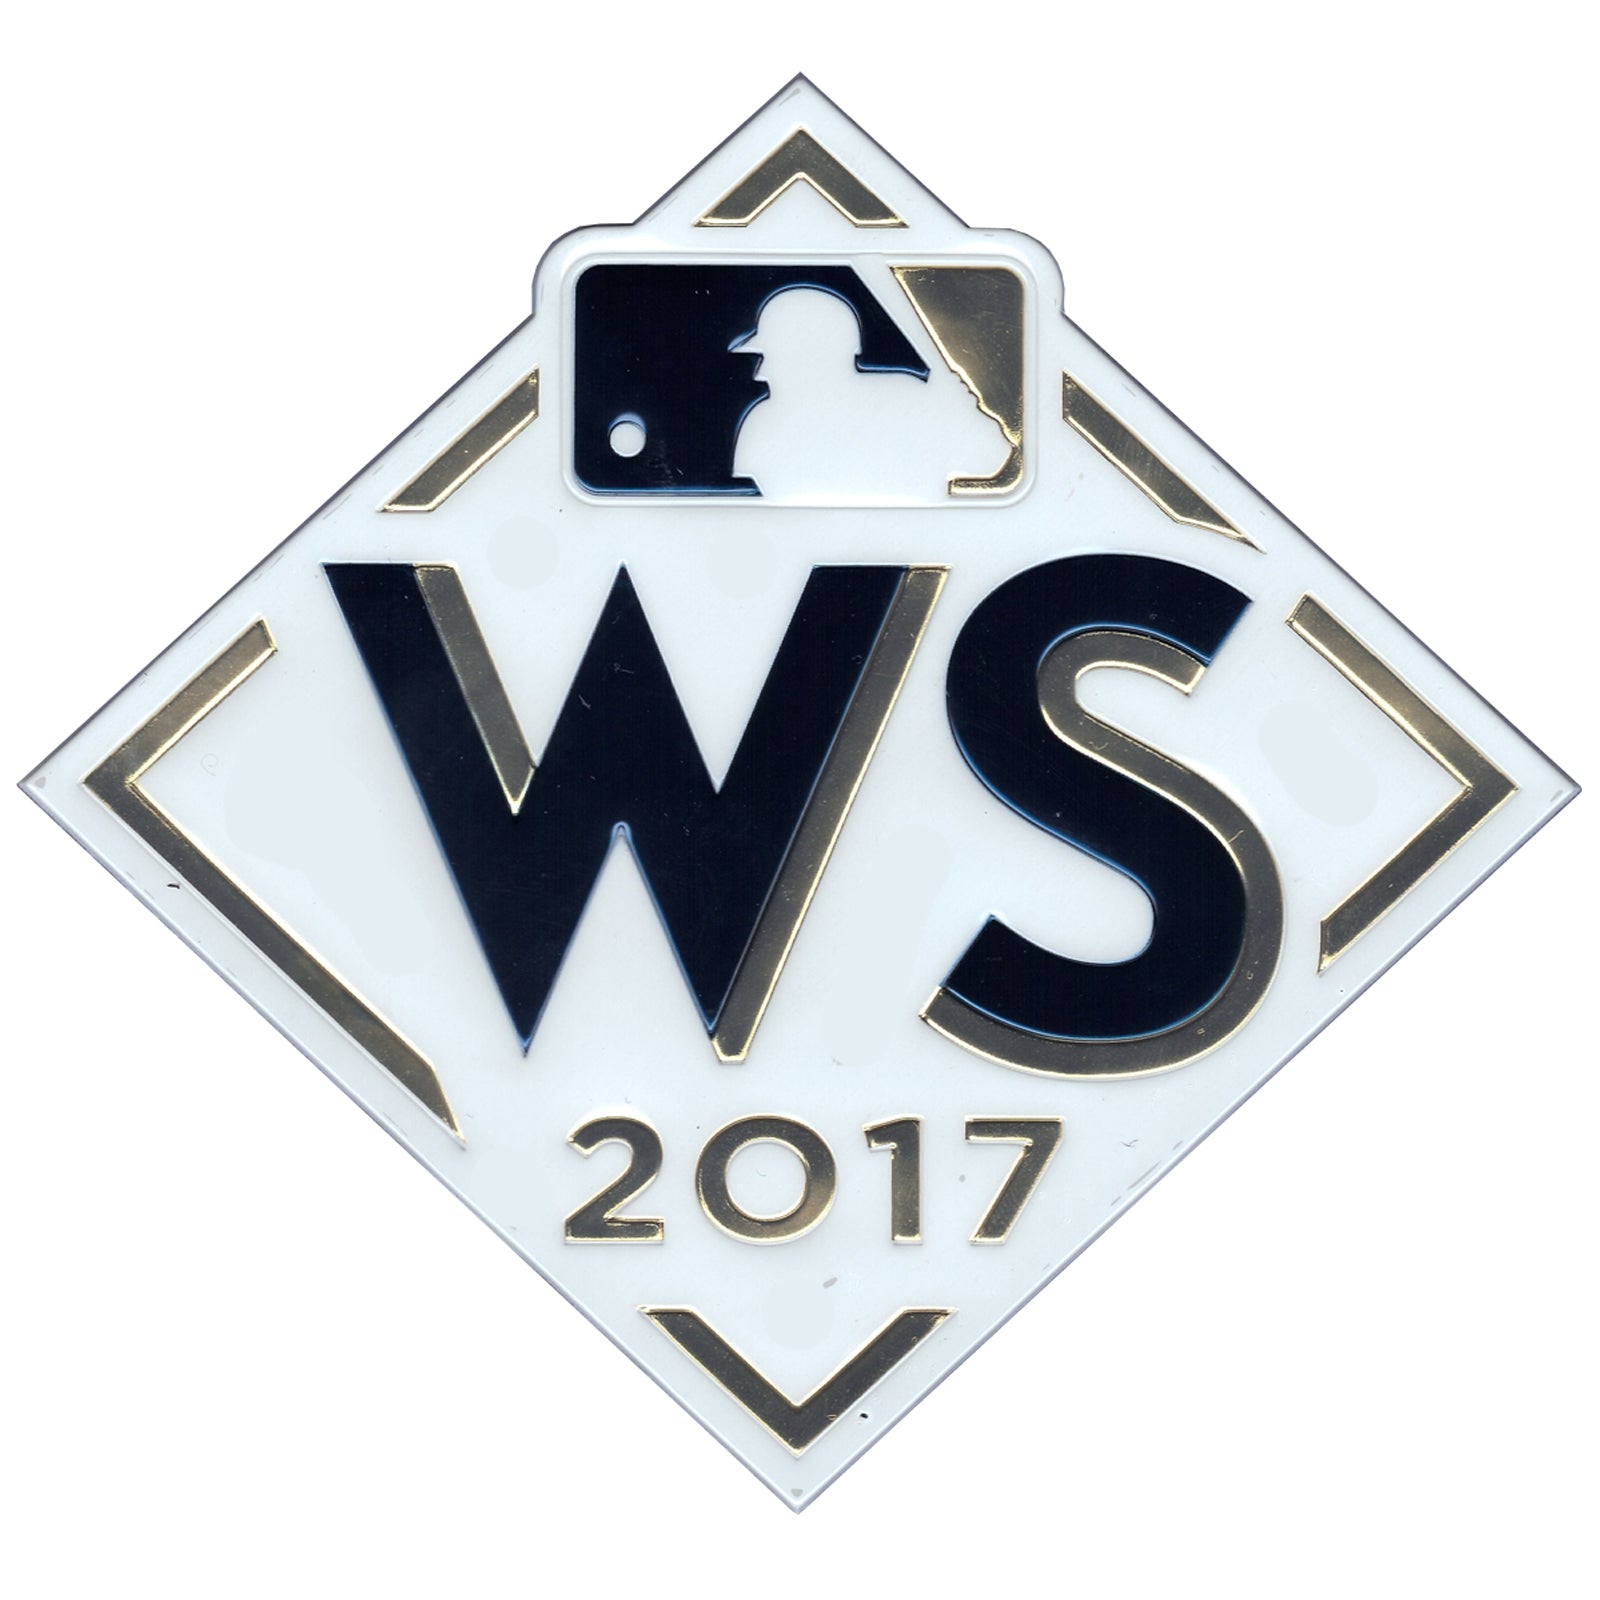 World Series jersey patches, New patches. #WorldSeries, By Los Angeles  Dodgers